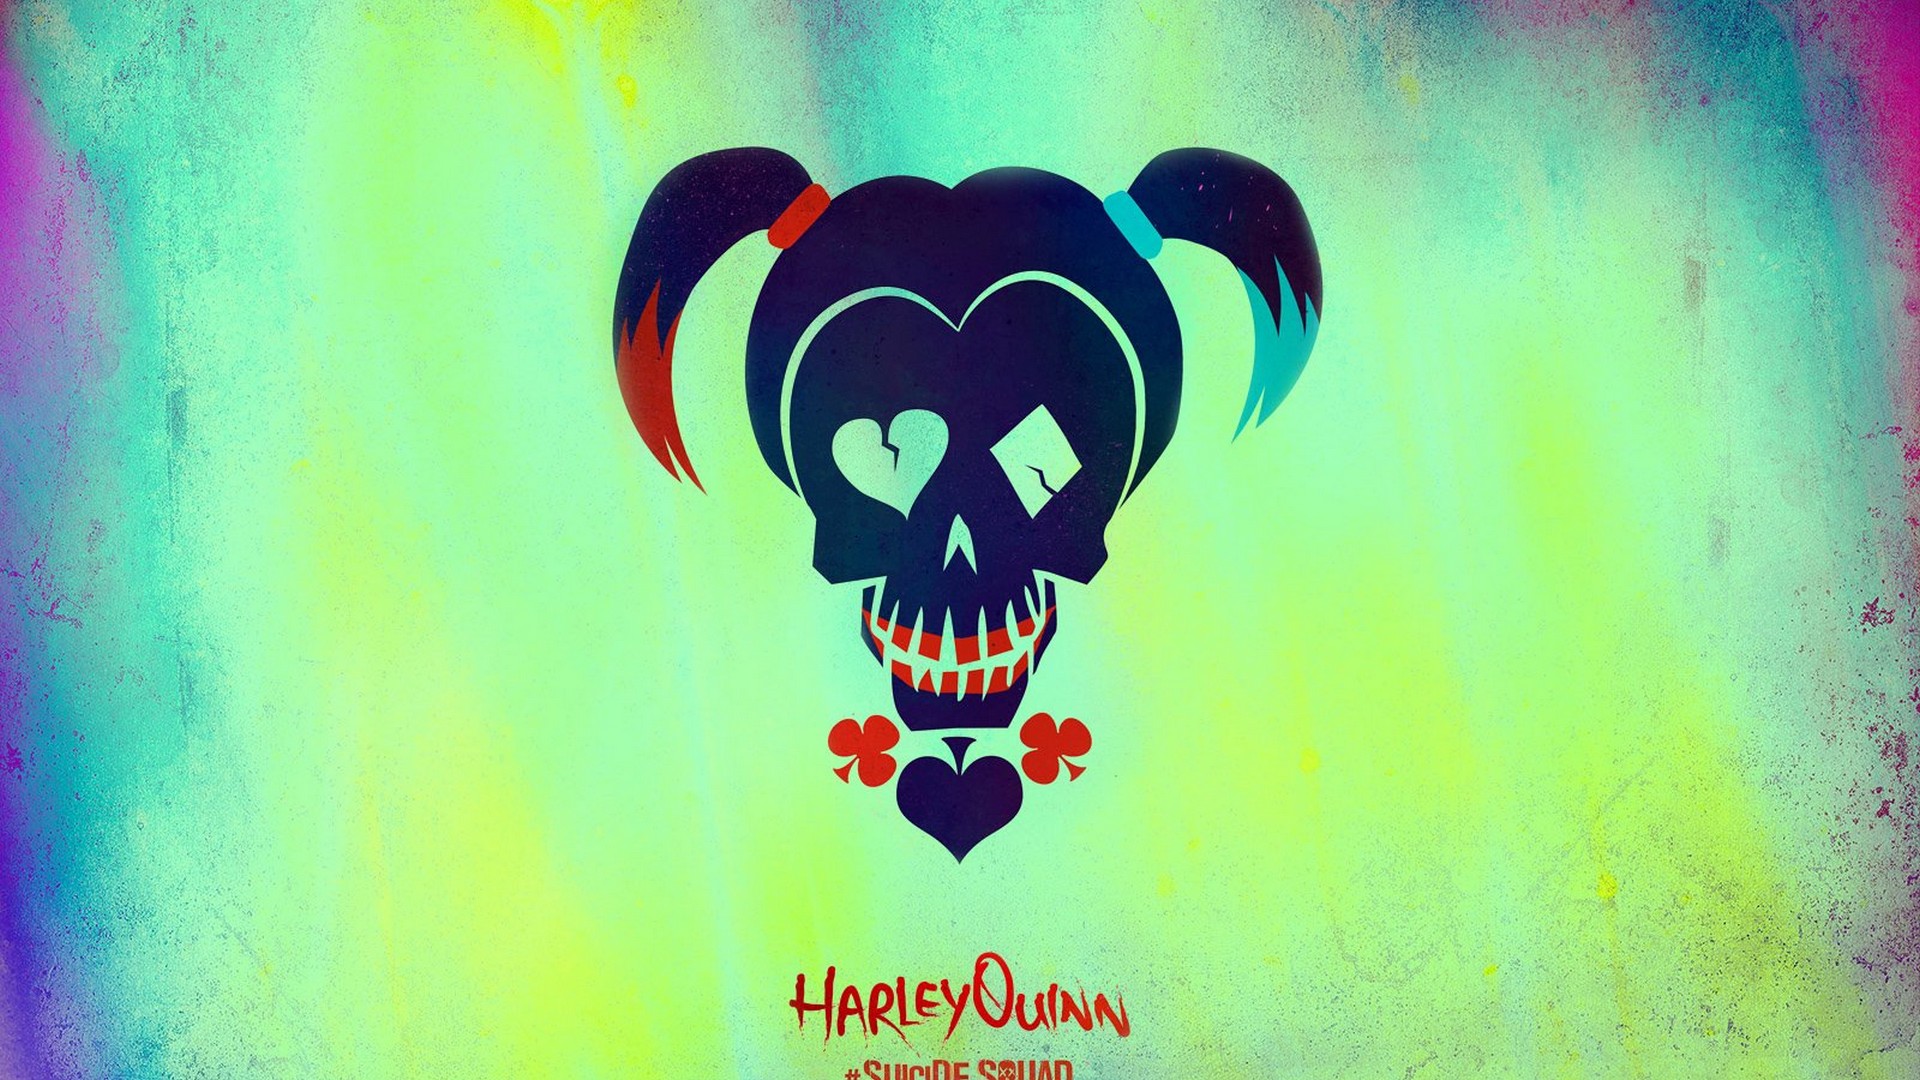 Best Harley Quinn Wallpaper with image resolution 1920x1080 pixel. You can use this wallpaper as background for your desktop Computer Screensavers, Android or iPhone smartphones